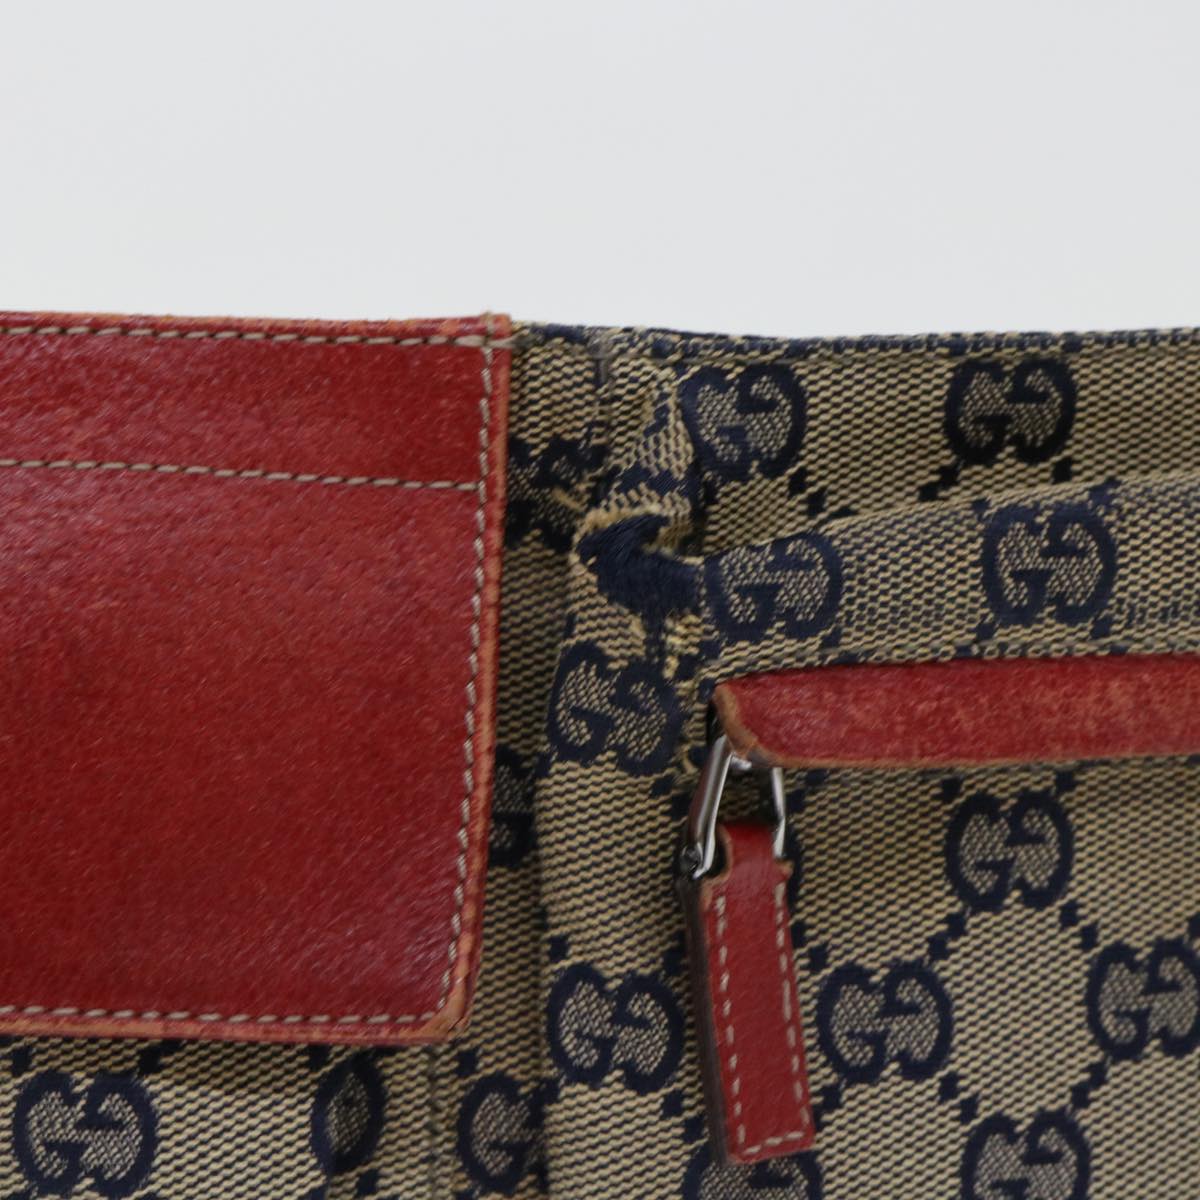 GUCCI GG Canvas Sherry Line Waist bag Leather Beige Red Navy 28566 Auth 52752 - 0